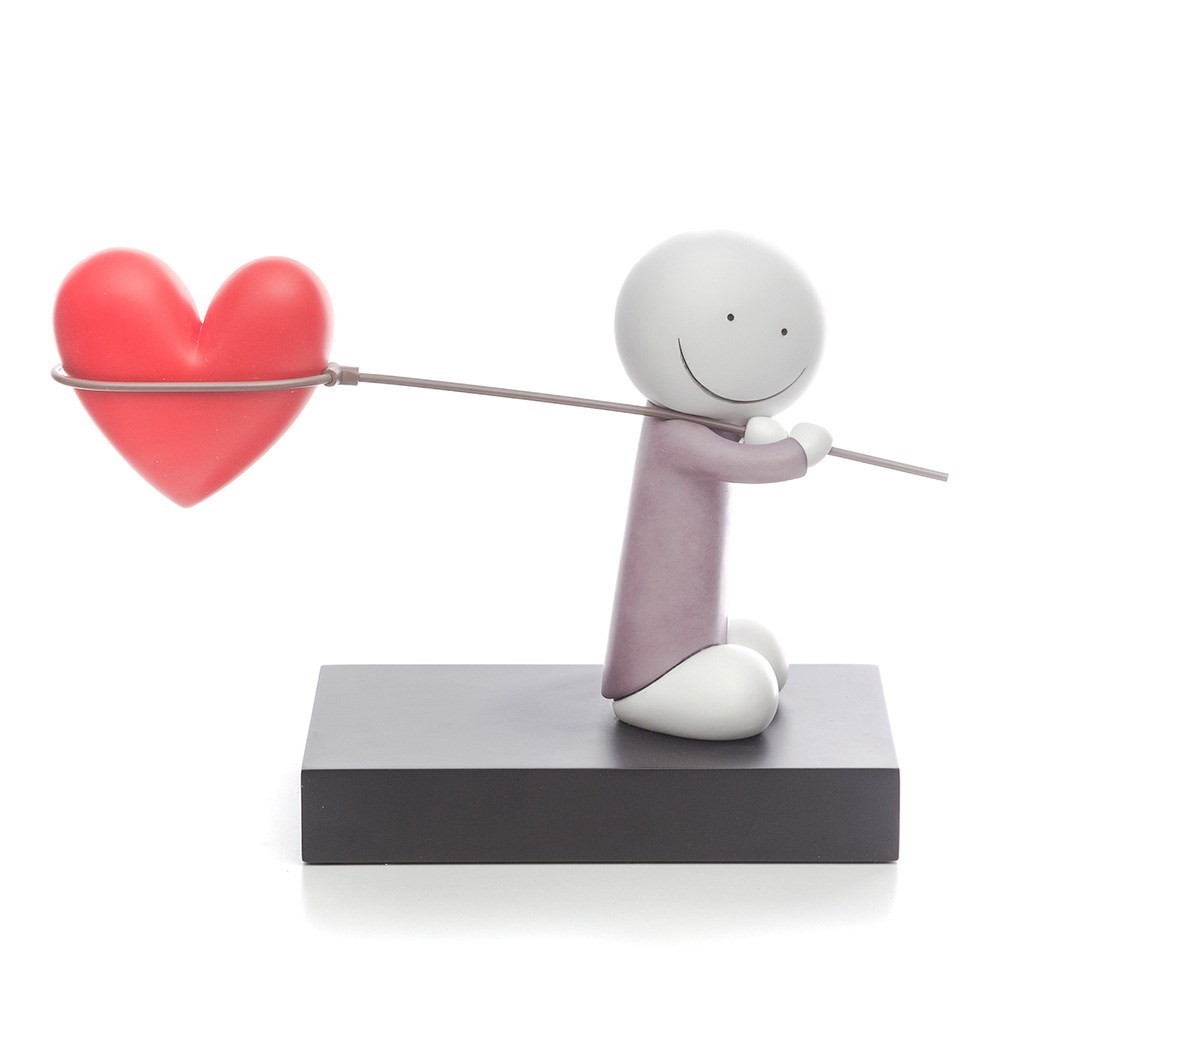 Caught up in Love by Doug Hyde